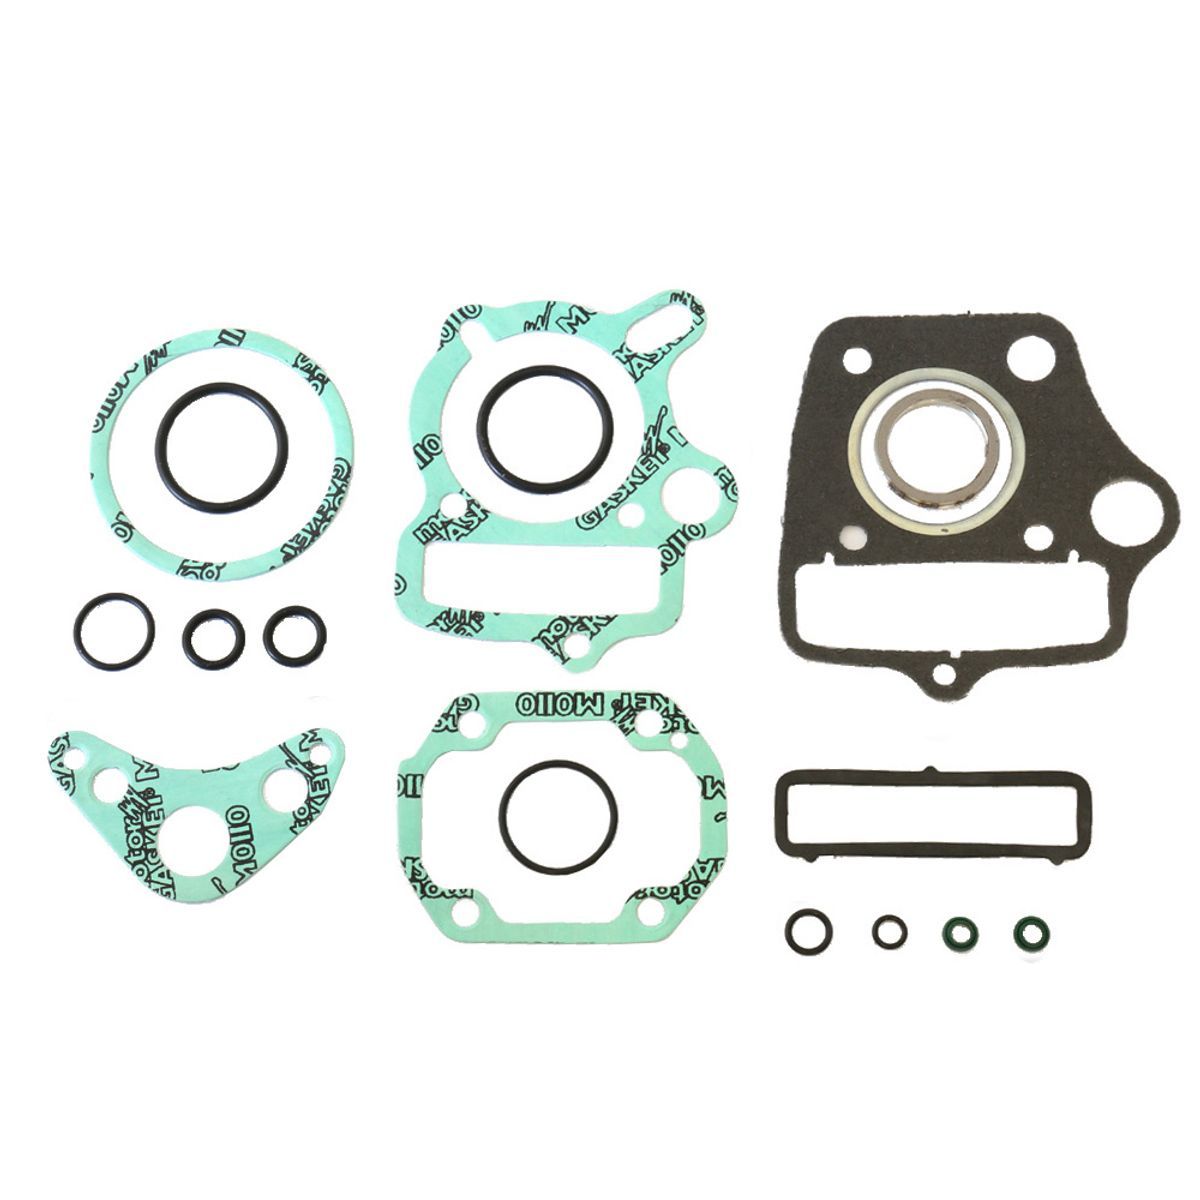 Motorcycle Gaskets Large assortment on